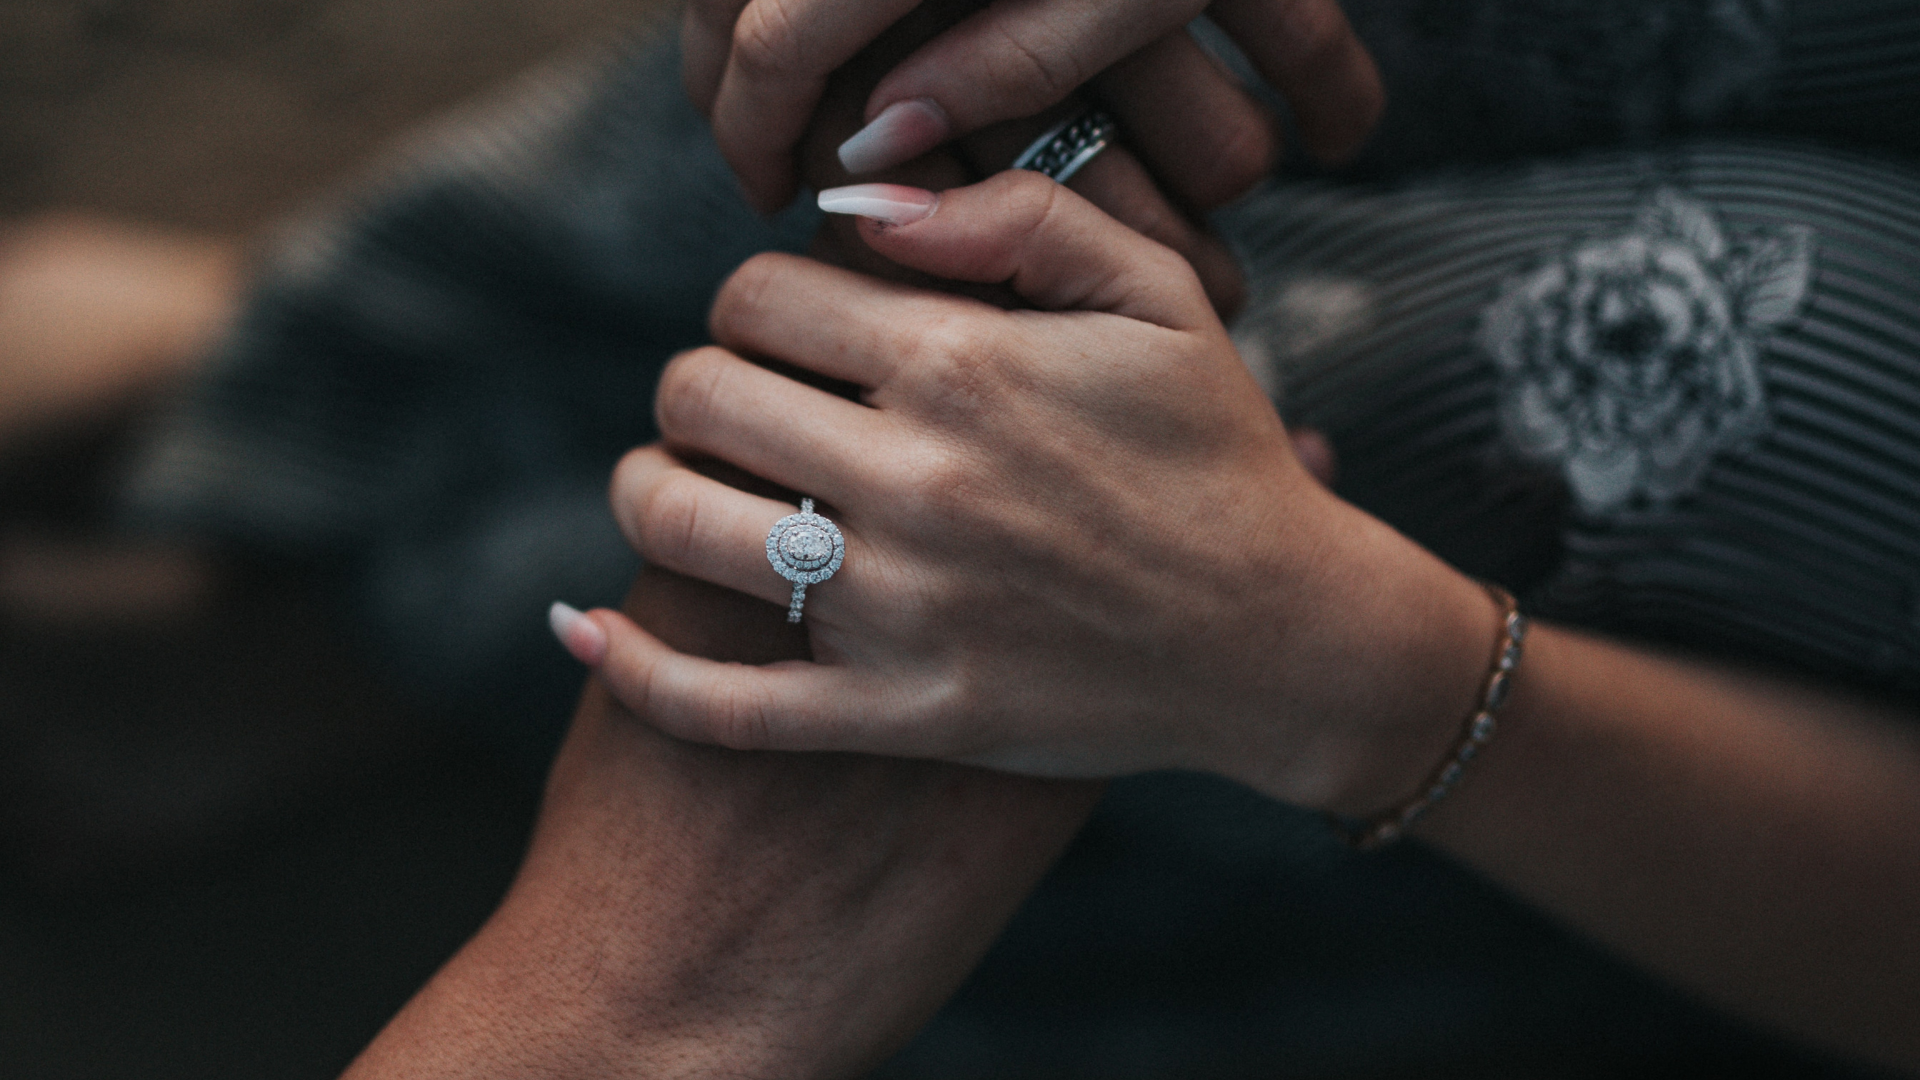 6 Engagement Rings You Actually Won't Be Able to Resist Saying "Yes" To